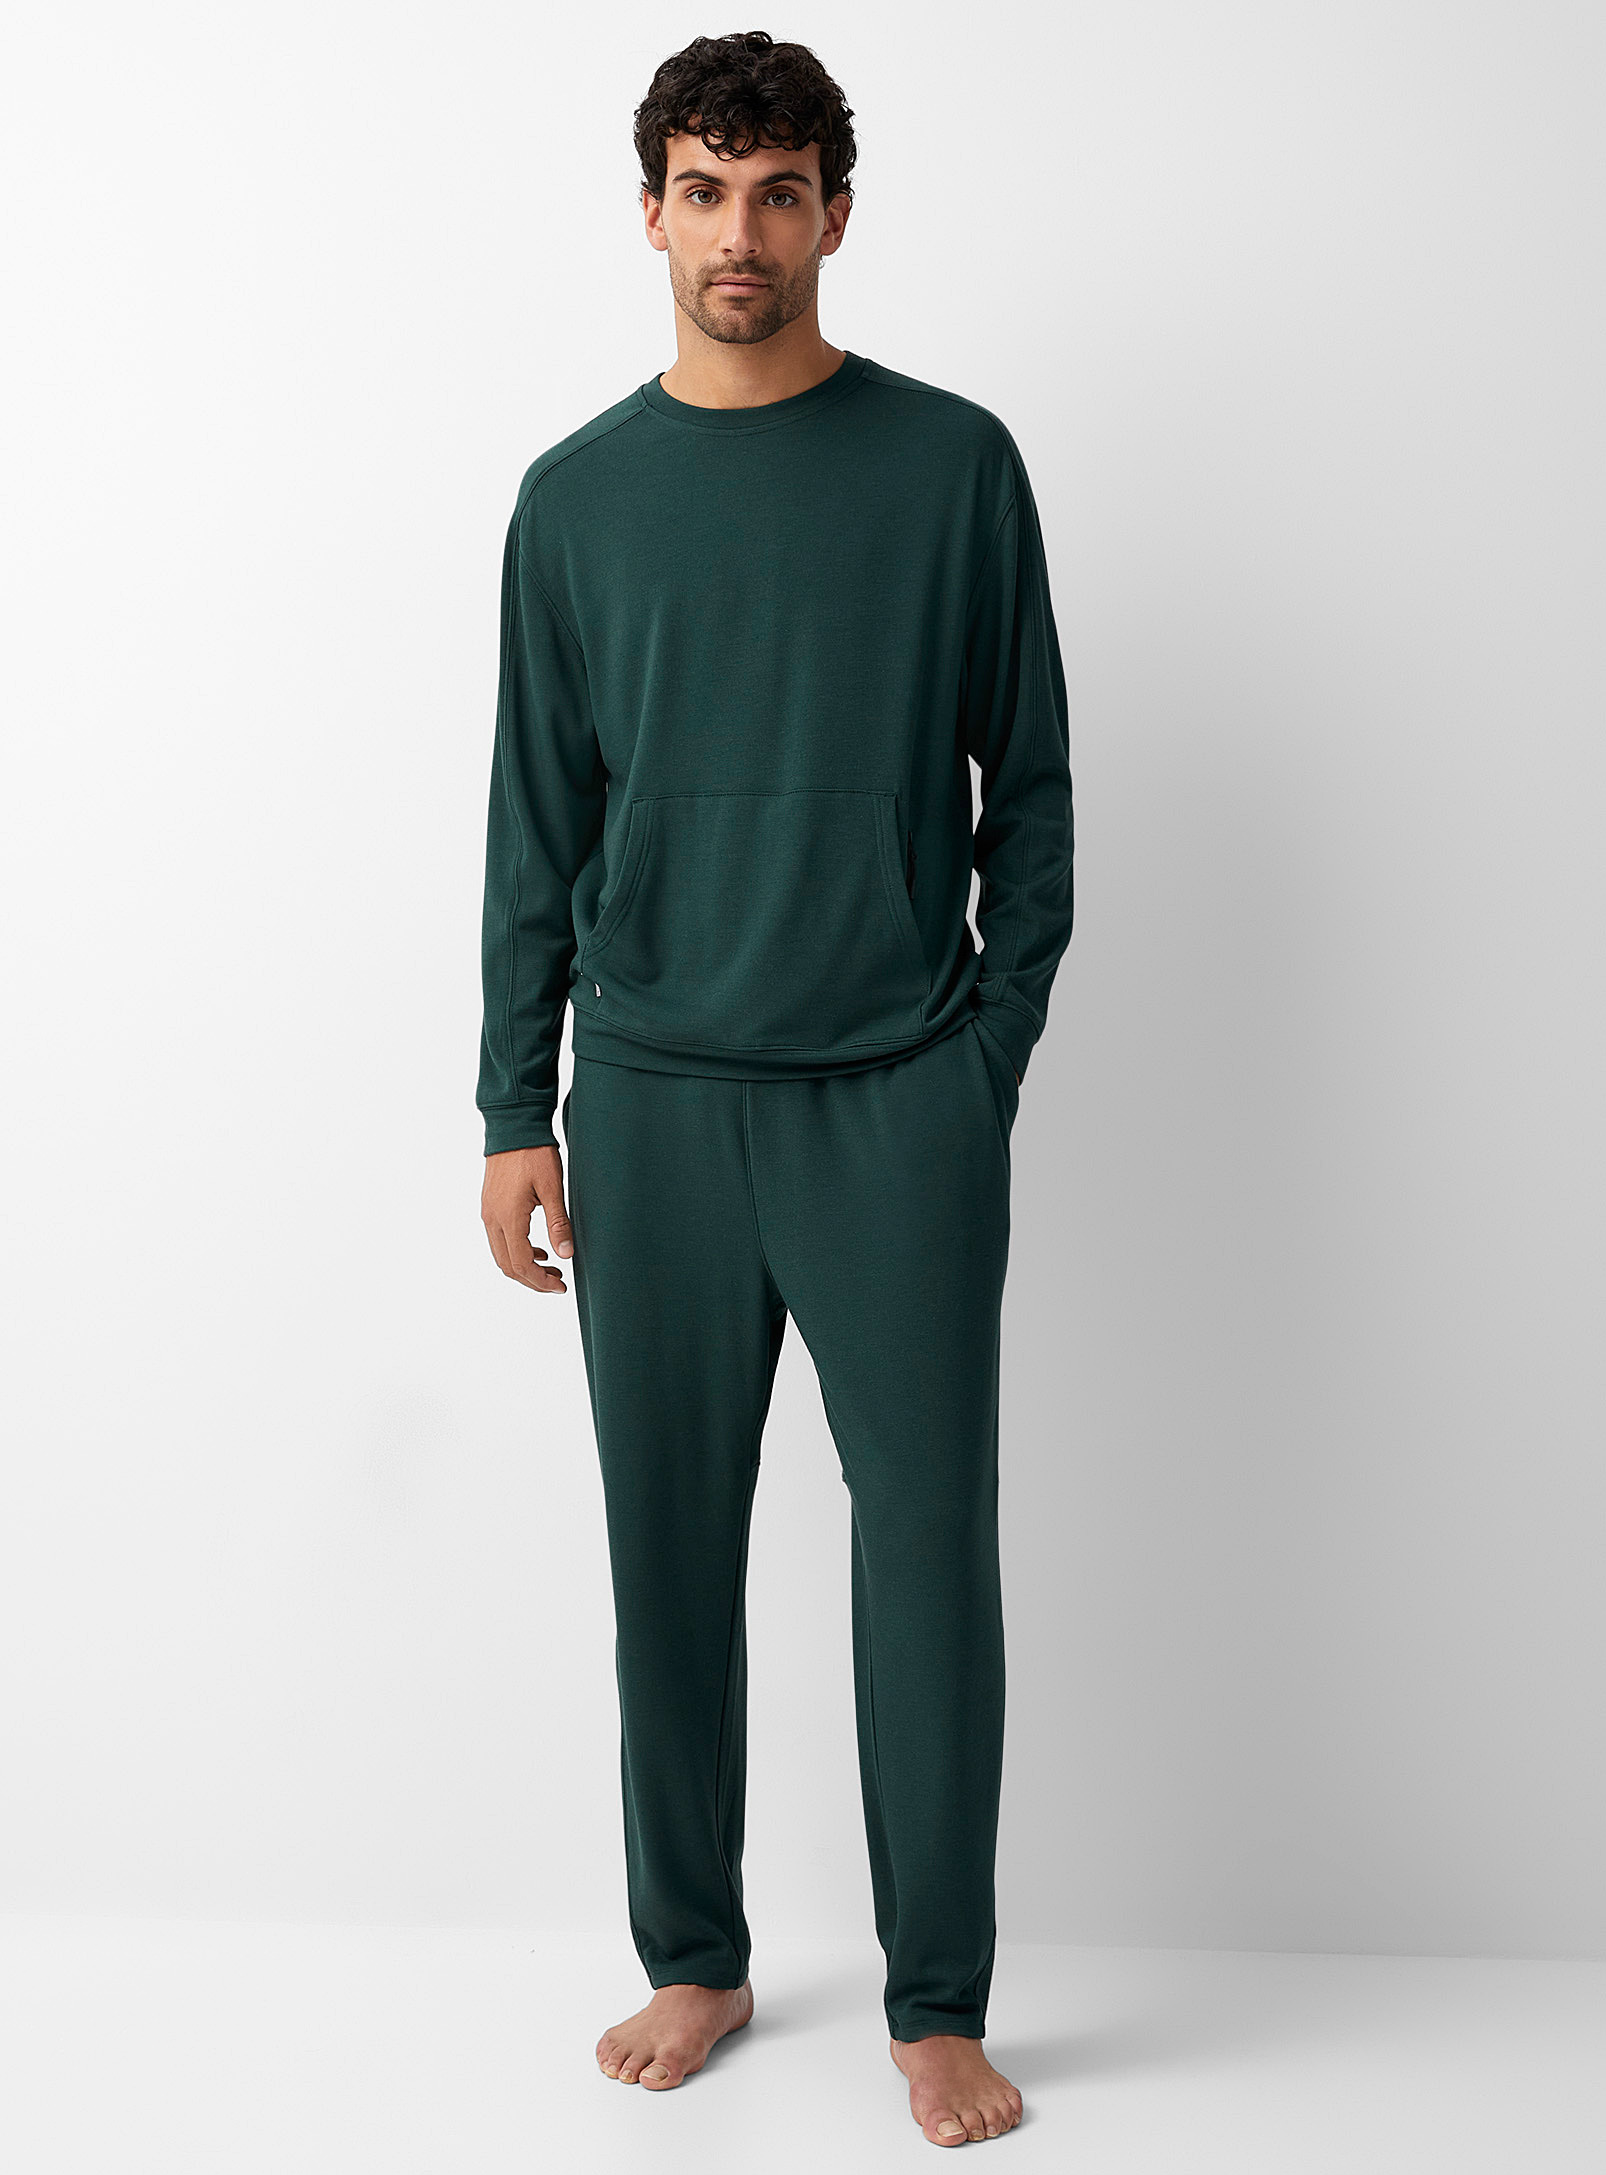 Everyday Sunday - Men's Forest-green viscose lounge pant